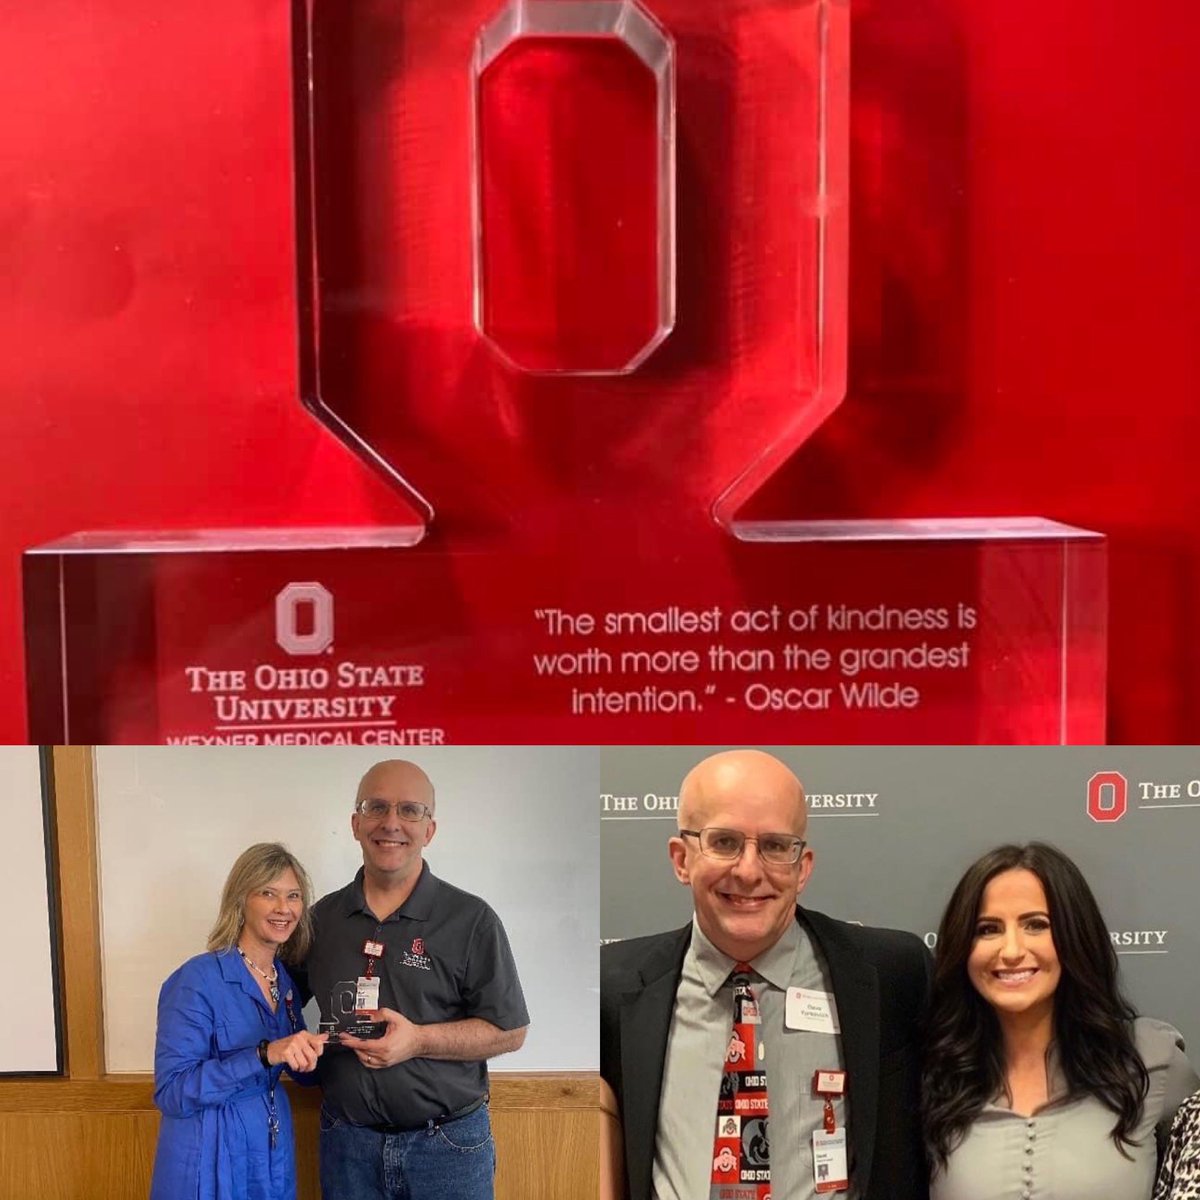 CONGRATULATIONS to my colleague and friend Dave Yurkovich, who was honored with a Customer Service Award from OSU Wexner Medical Center Faculty & Staff Recognition. So happy to see his hard work, organization and dedication do not go unnoticed! @OSUWexMed @OhioStateMed